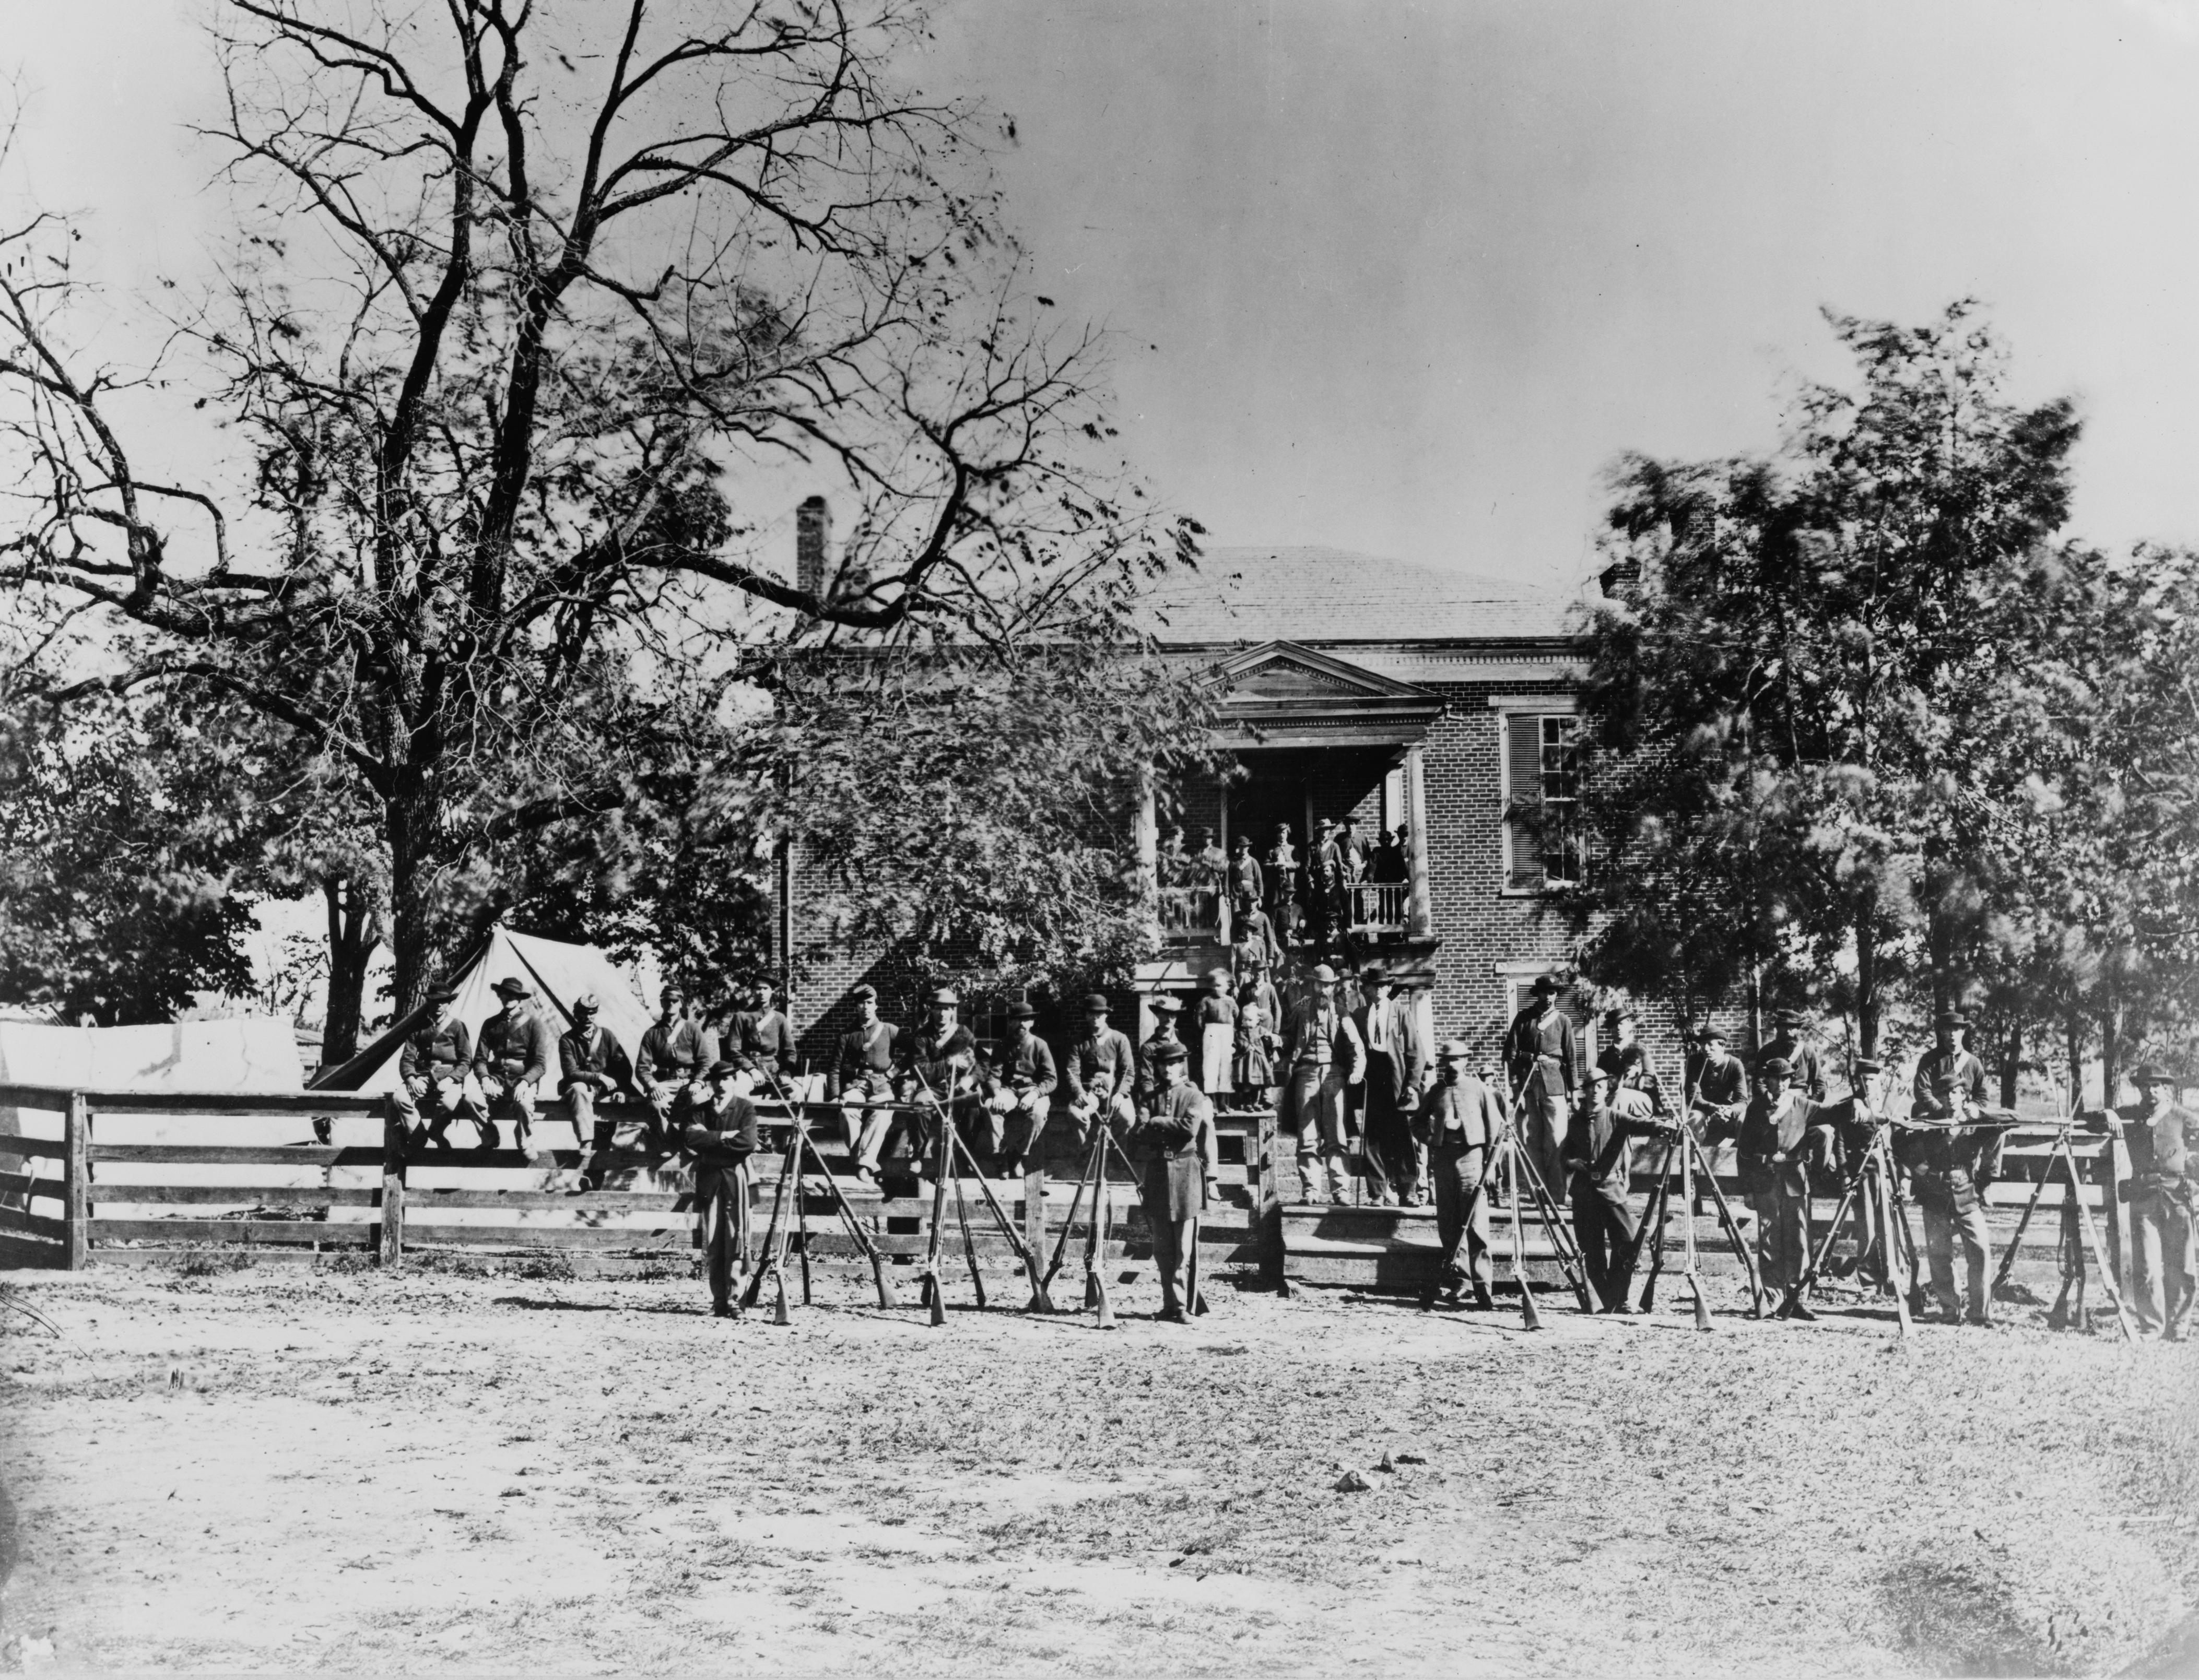 Photograph of the exterior, main facade, of Appomattox Court House, Appomattox, Virginia with Union soldiers posing in front of the building in April 1865.